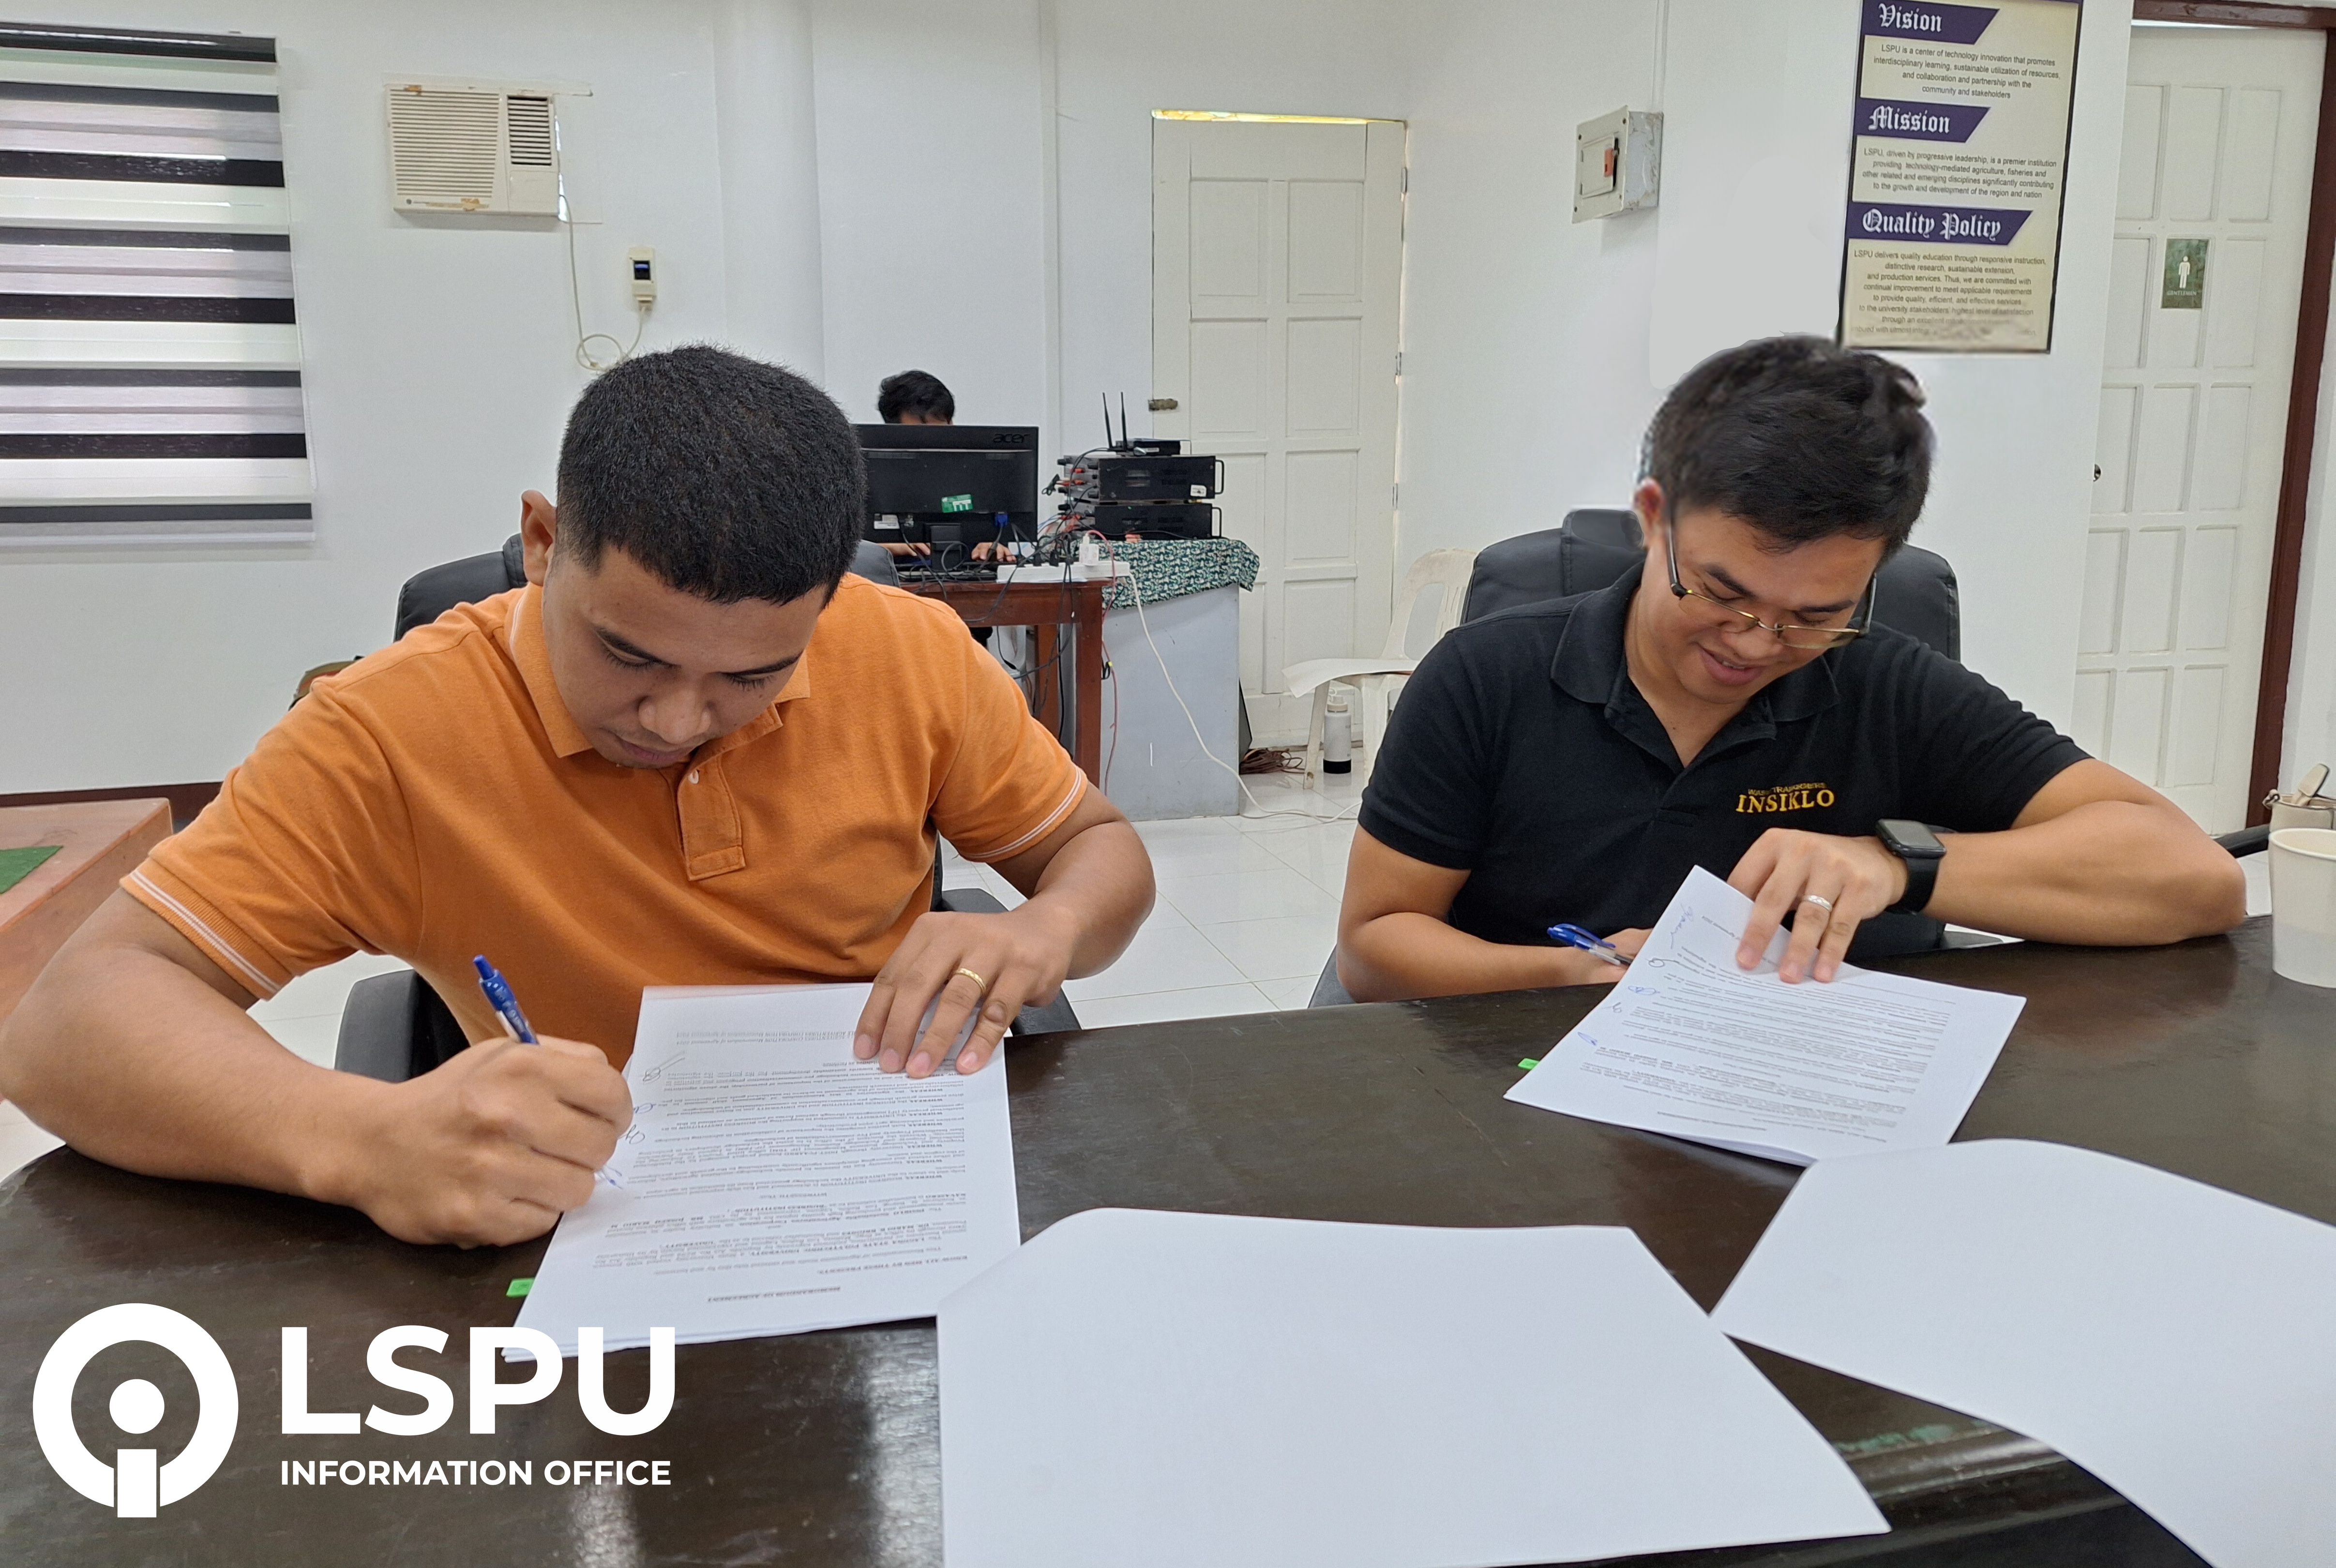 New partners join LSPU technology business incubation programs